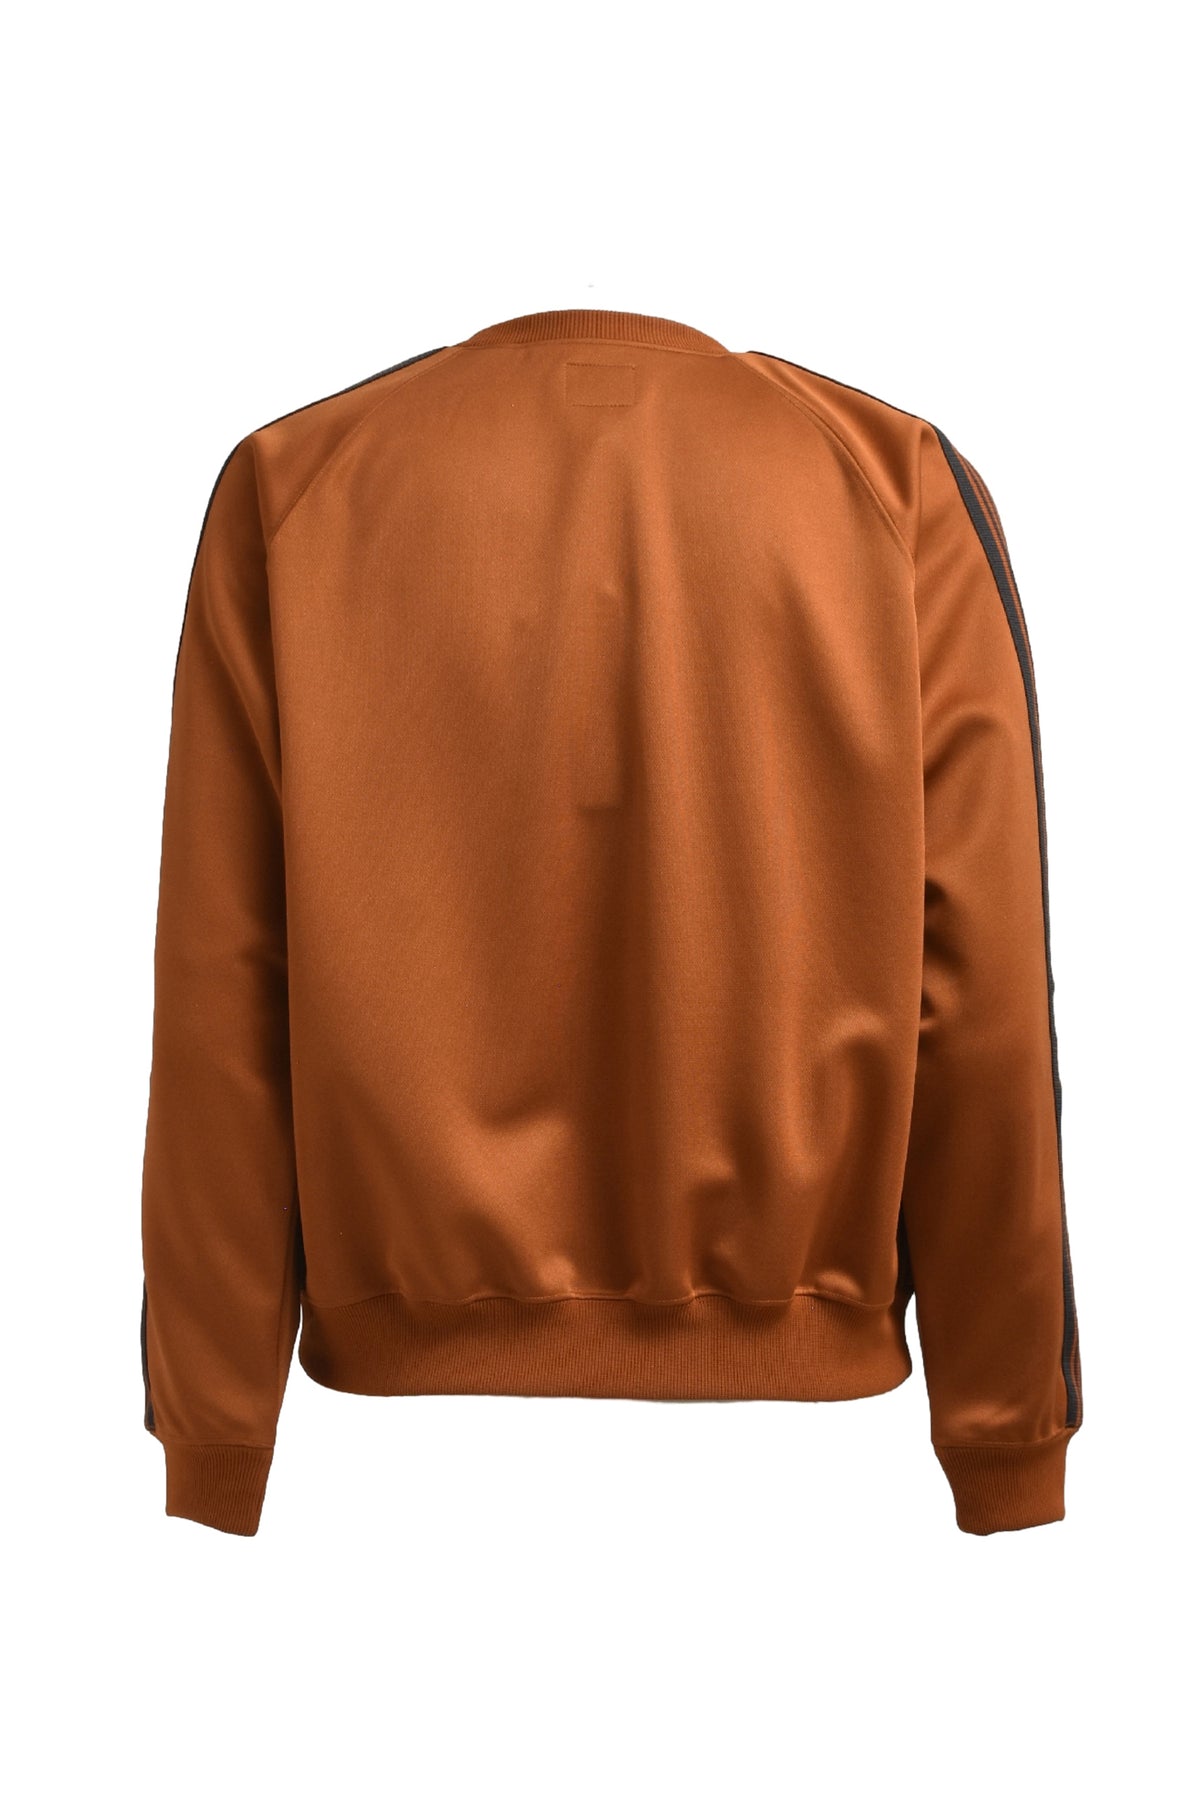 TRACK CREW NECK SHIRT - POLY SMOOTH / RUST